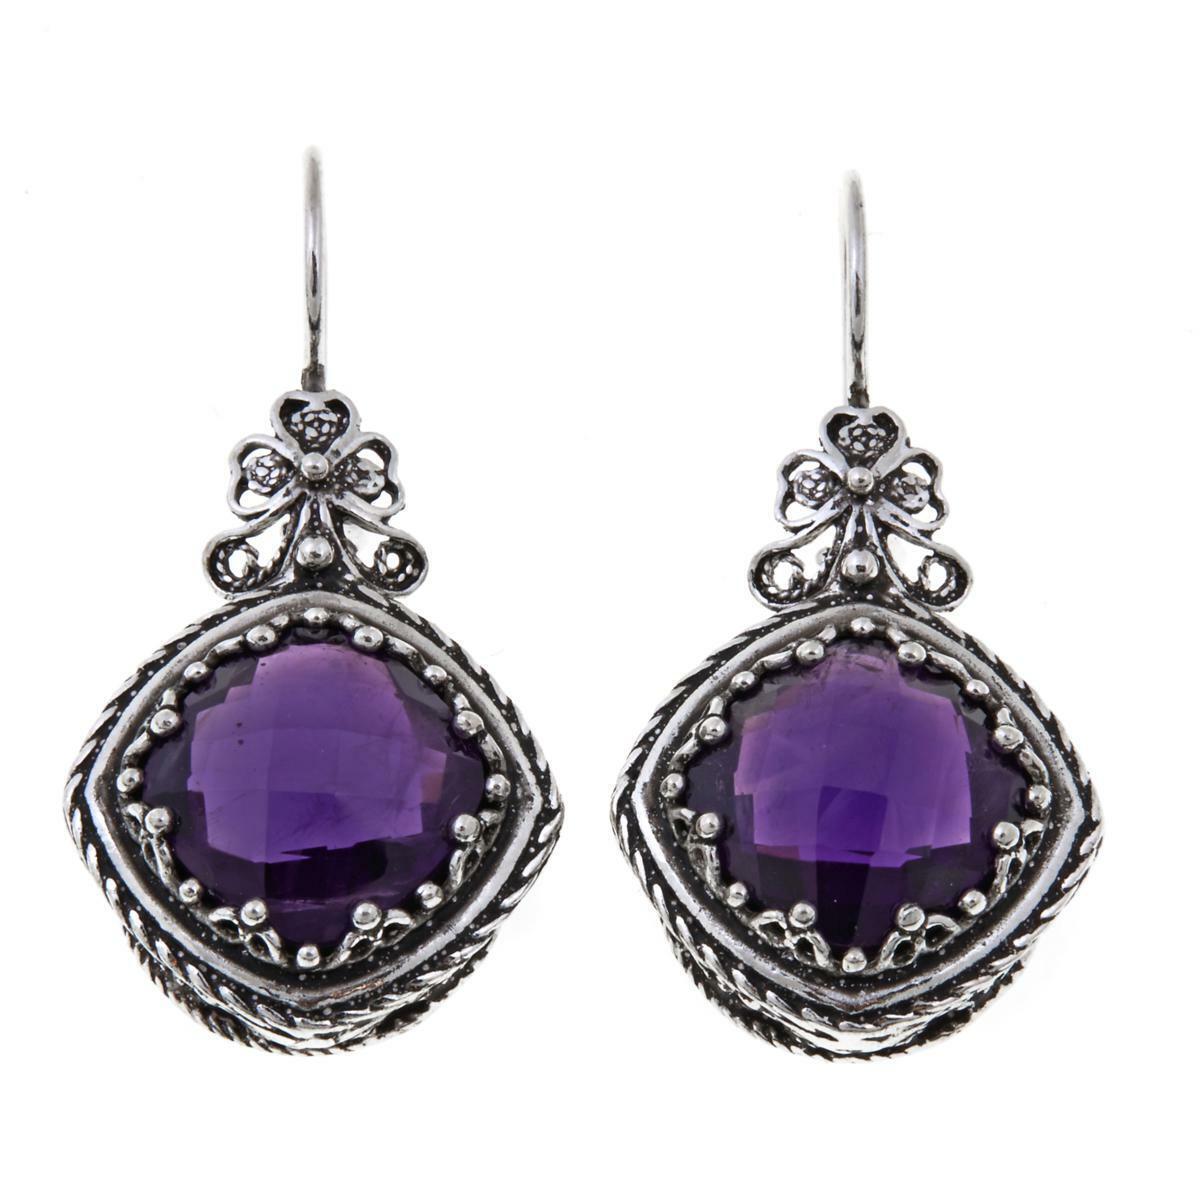 Ottoman Silver Jewelry Collection 11.8ctw Cushion-Cut Amethyst Drop Earrings